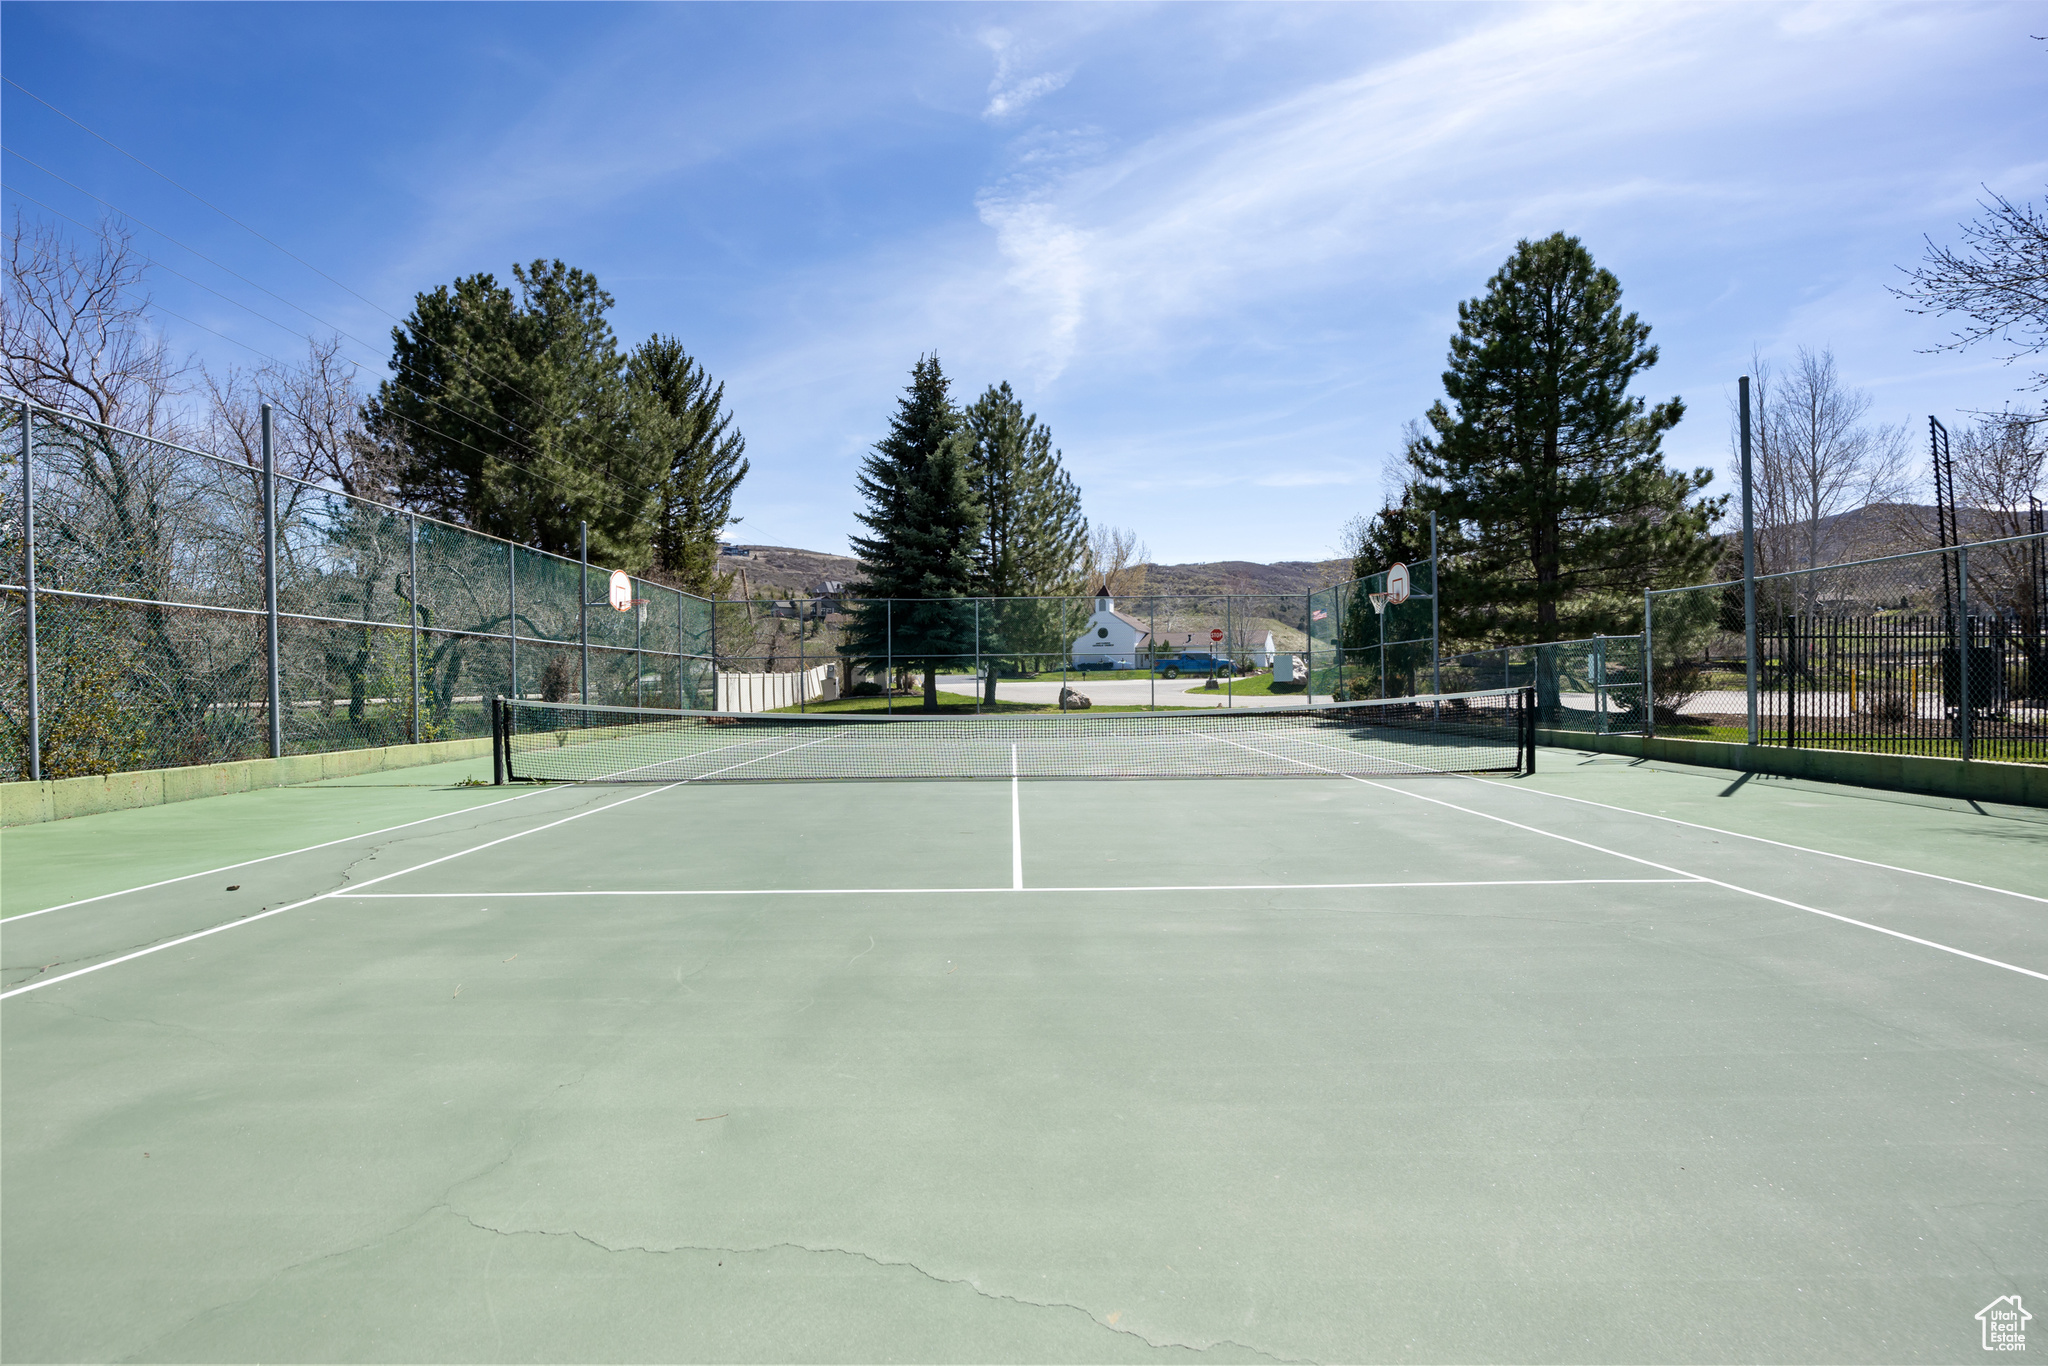 View of tennis court